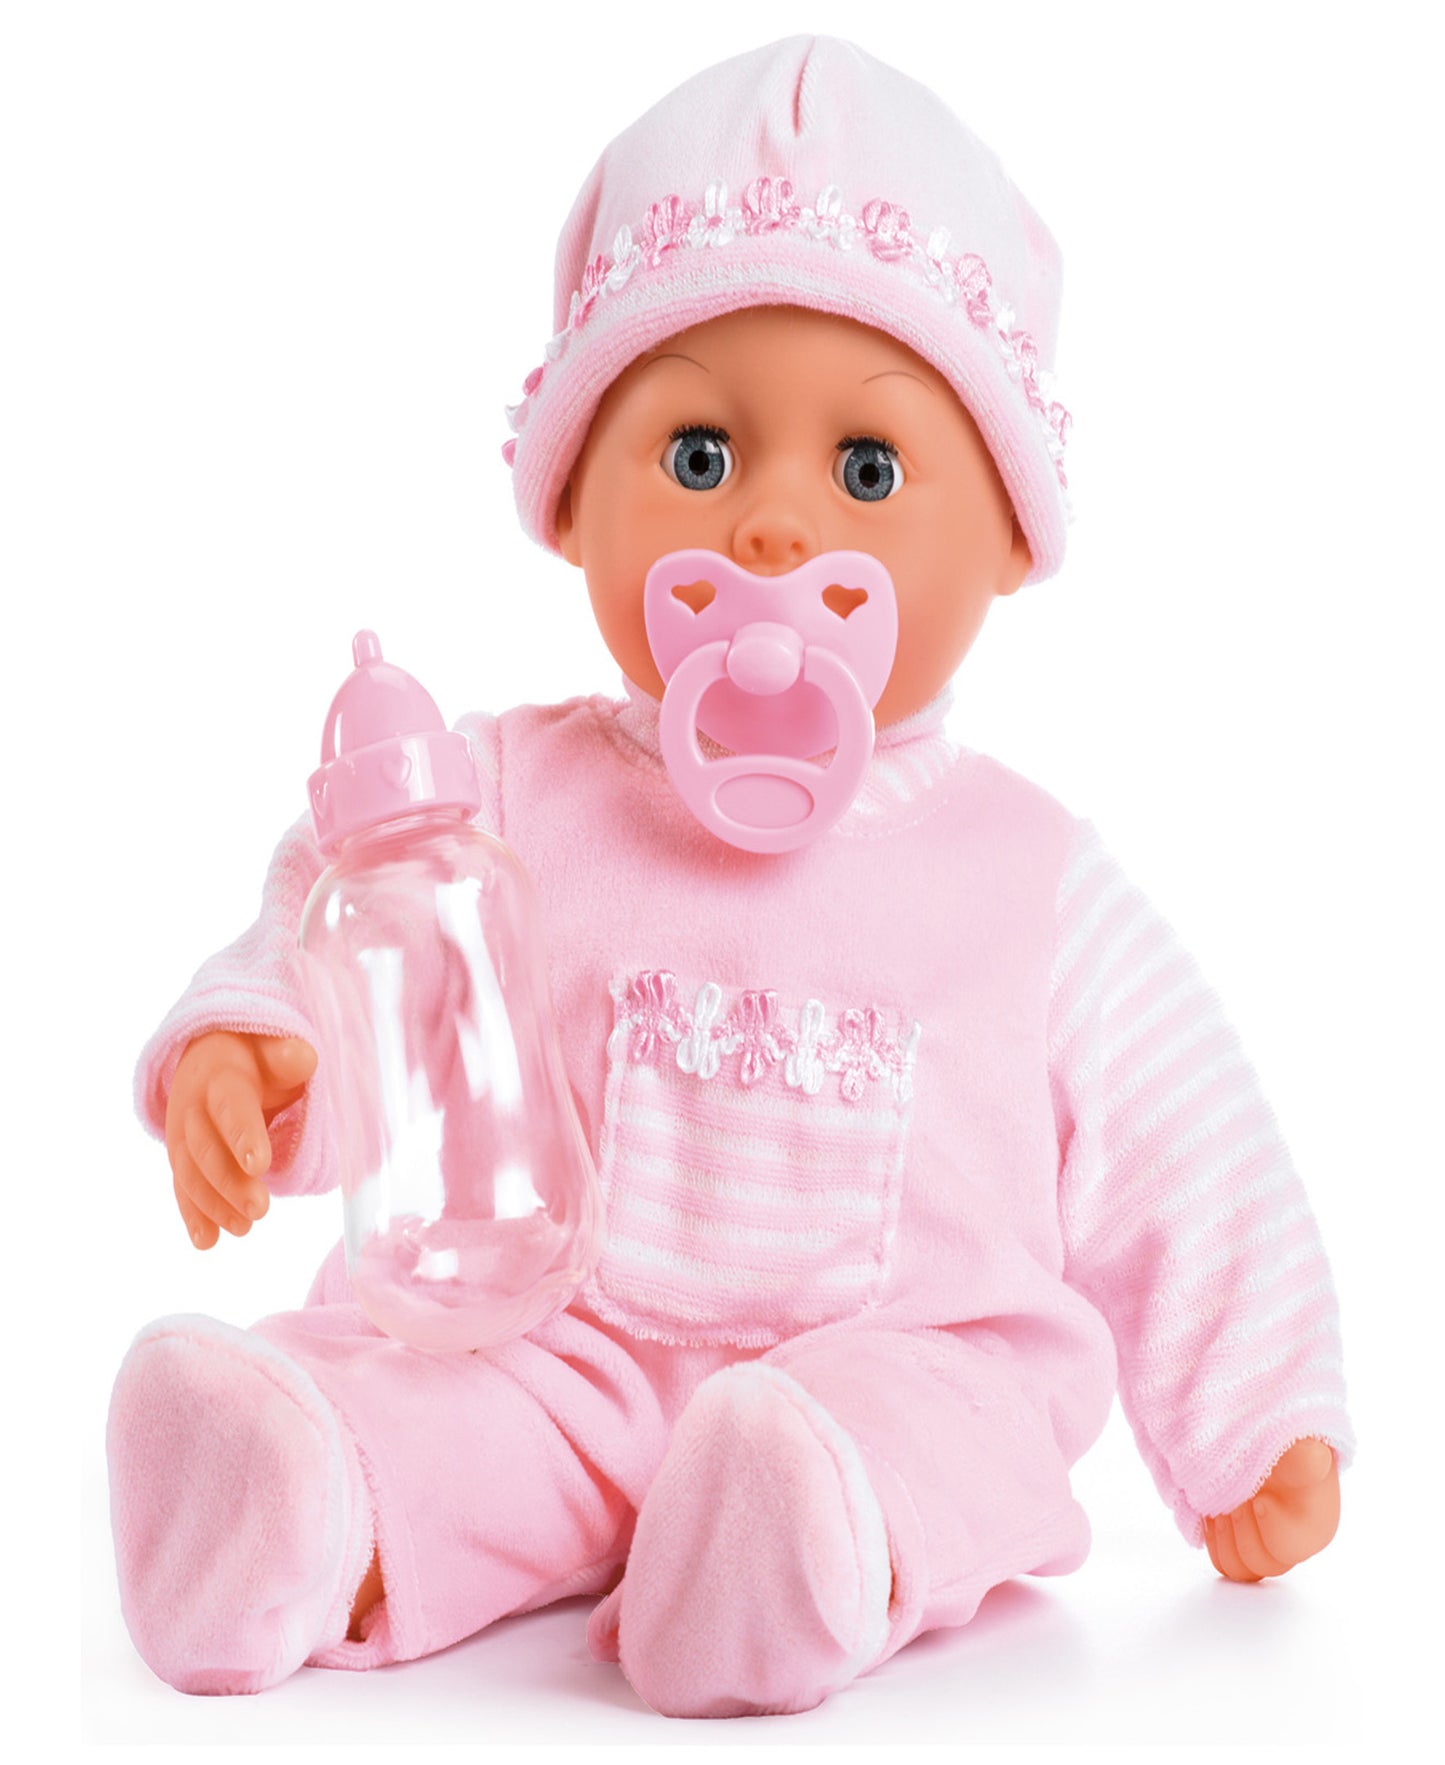 Bayer Design 15" Interactive First Words Baby Doll - Soft Pink